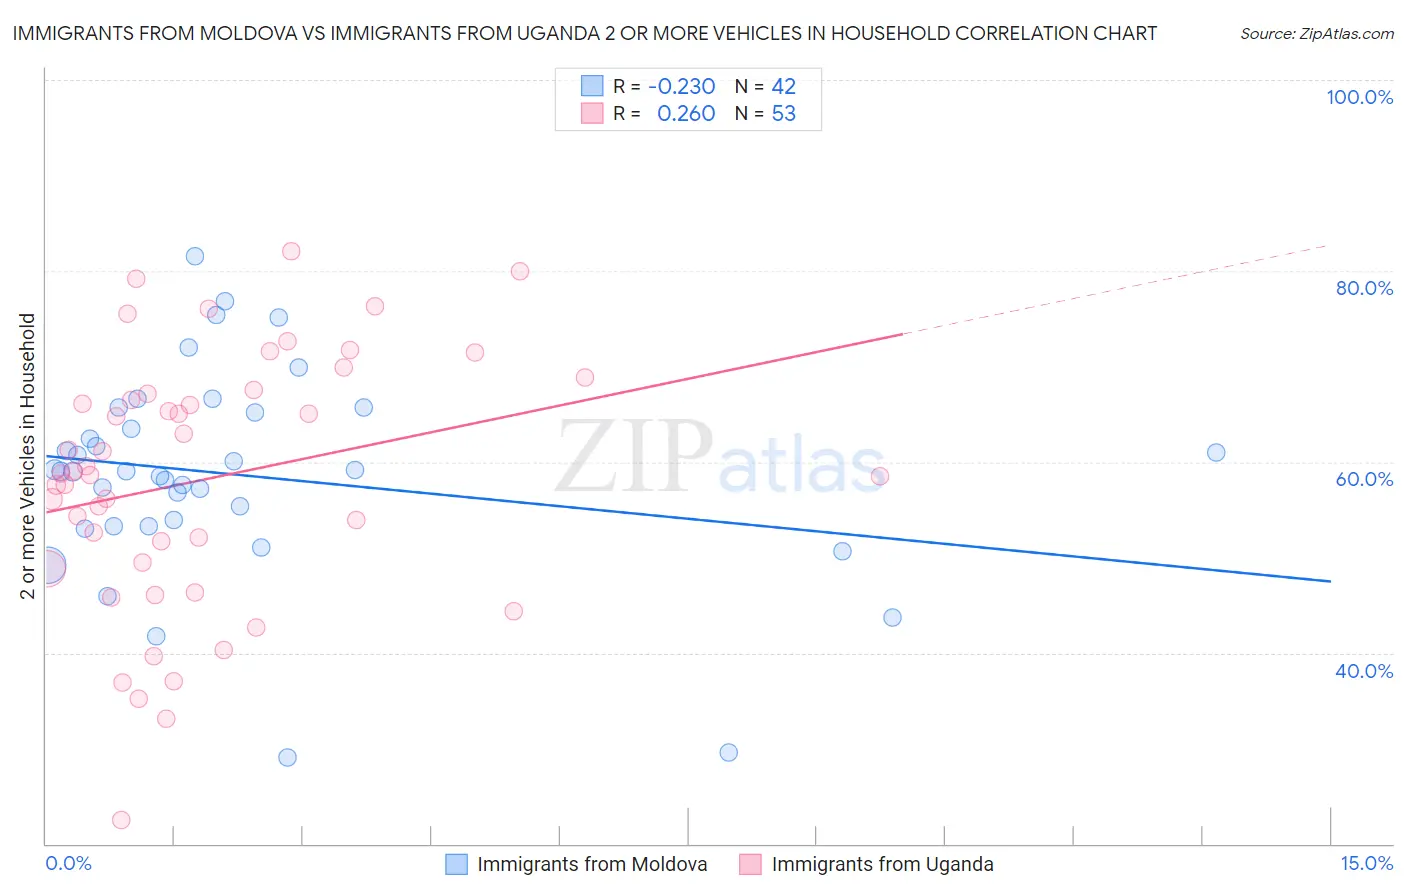 Immigrants from Moldova vs Immigrants from Uganda 2 or more Vehicles in Household